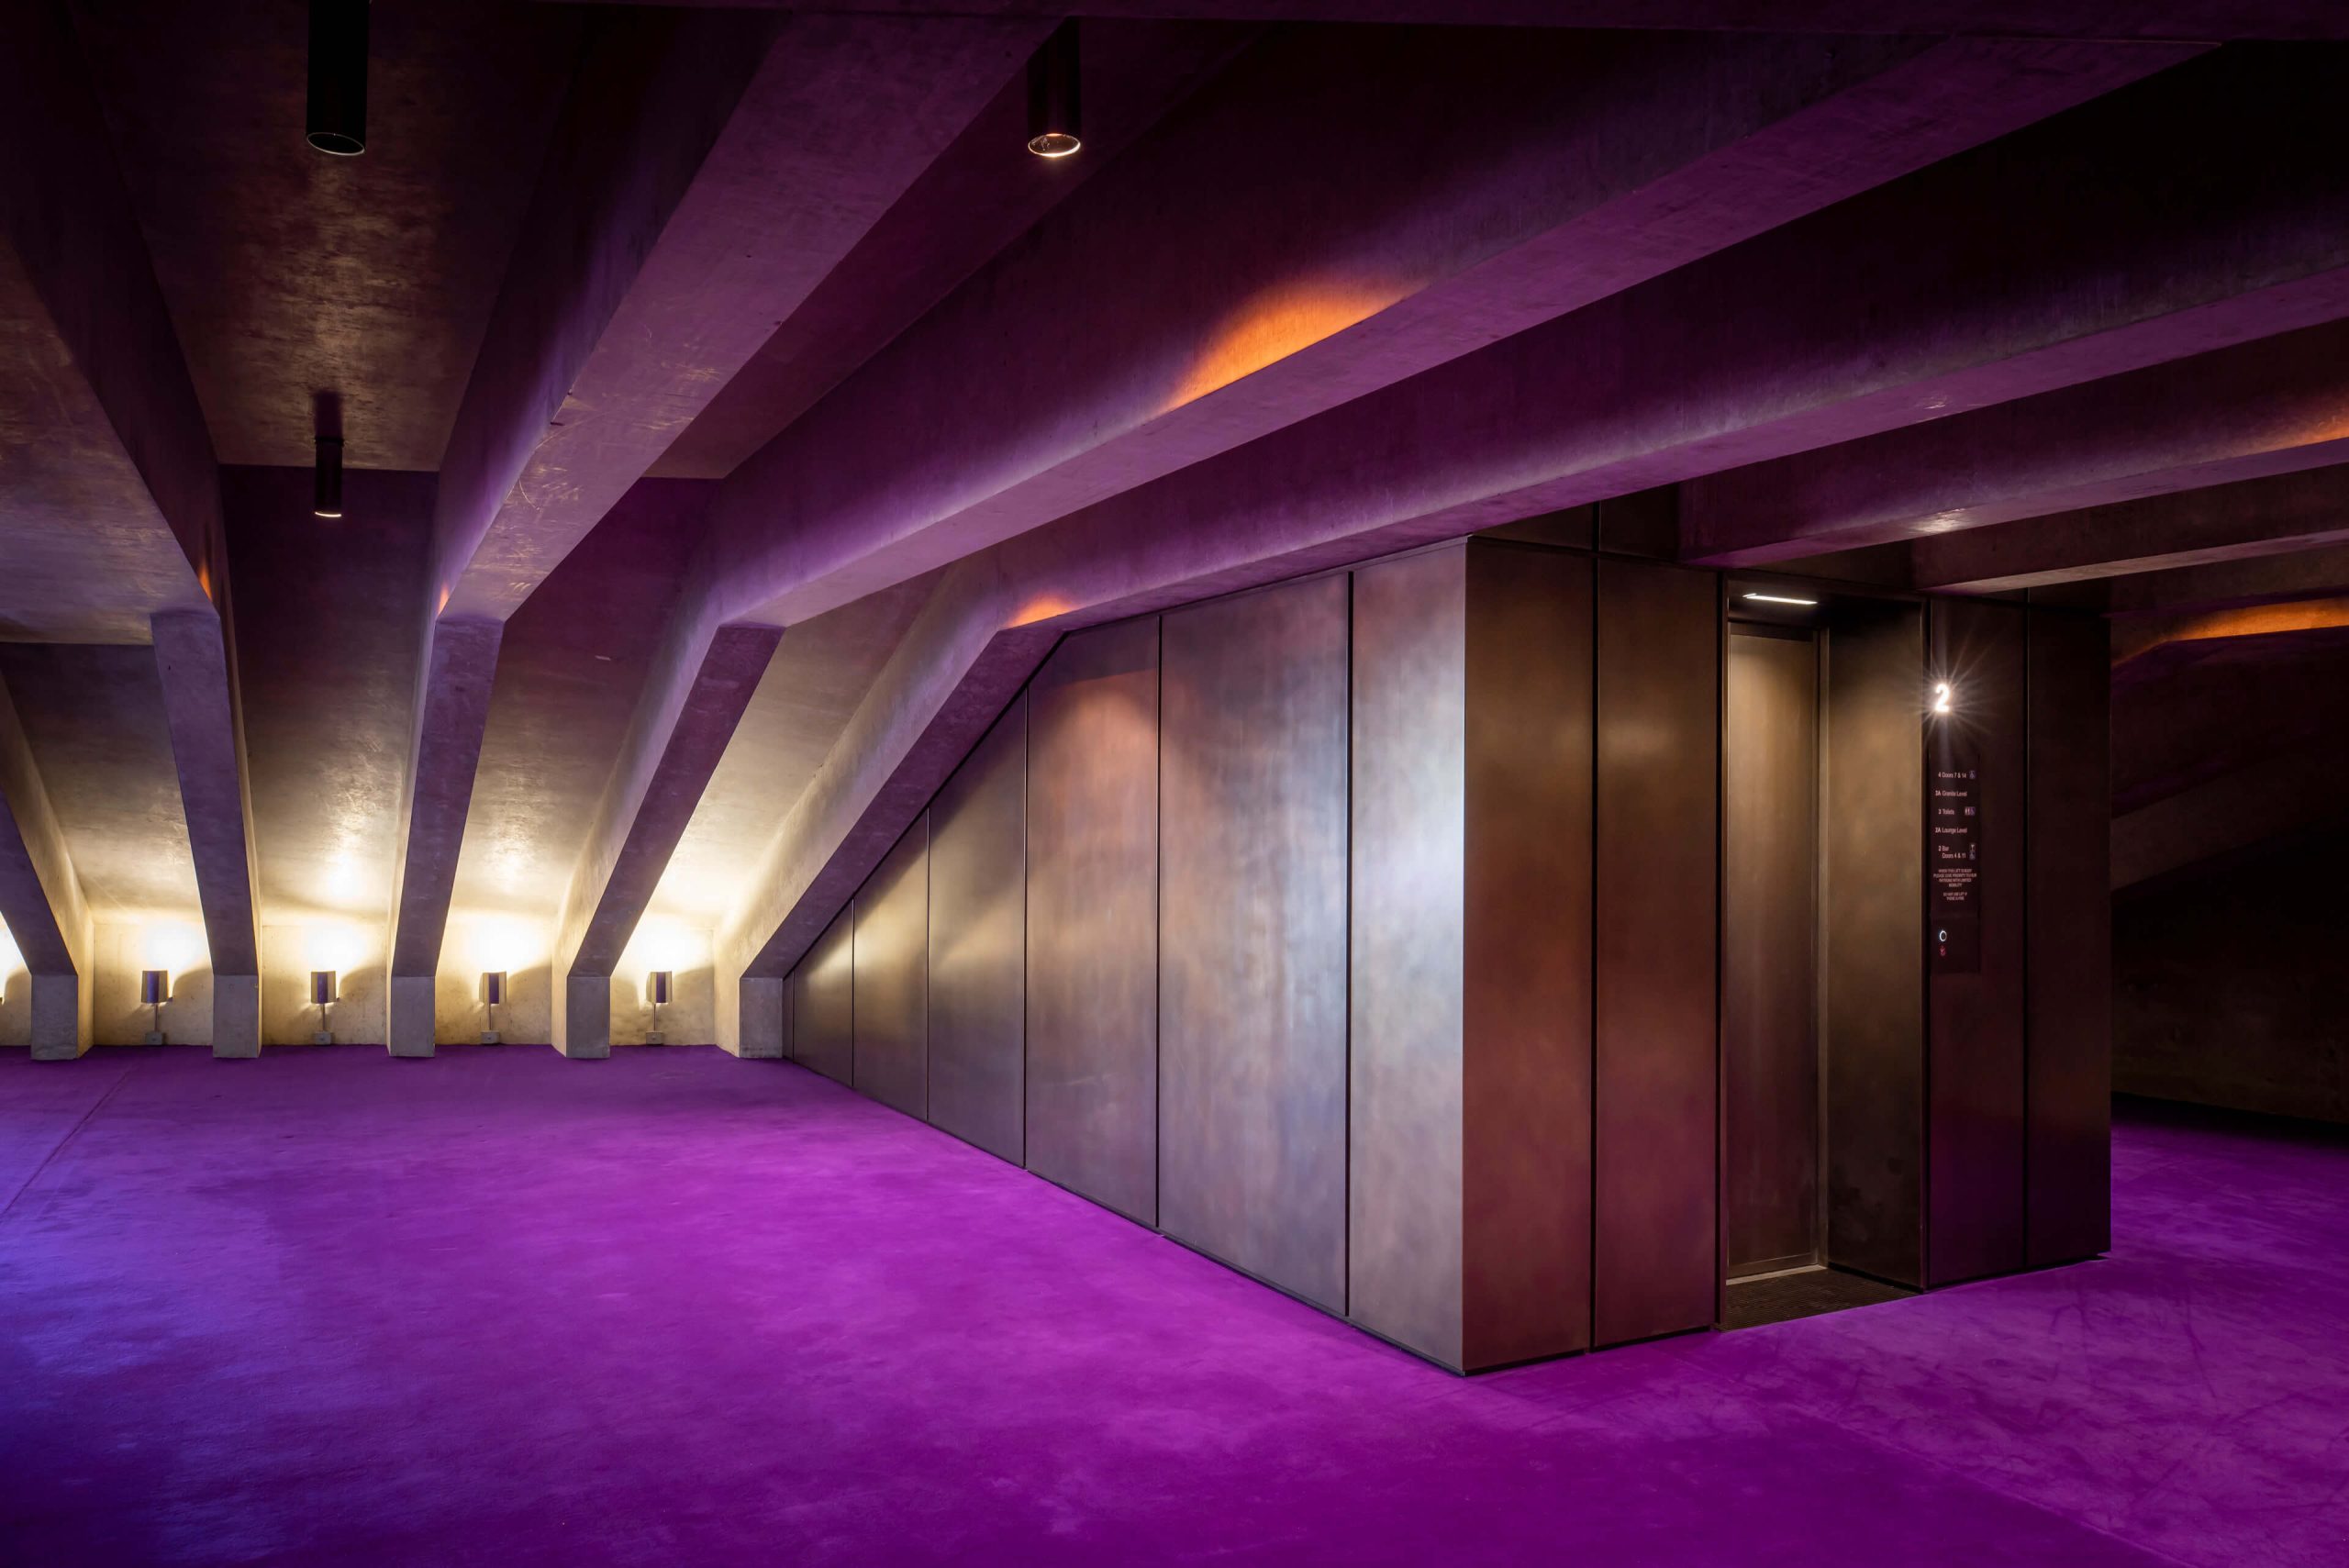 7 northern foyer lift at sydney opera house taylor construction refurbishment and live environments